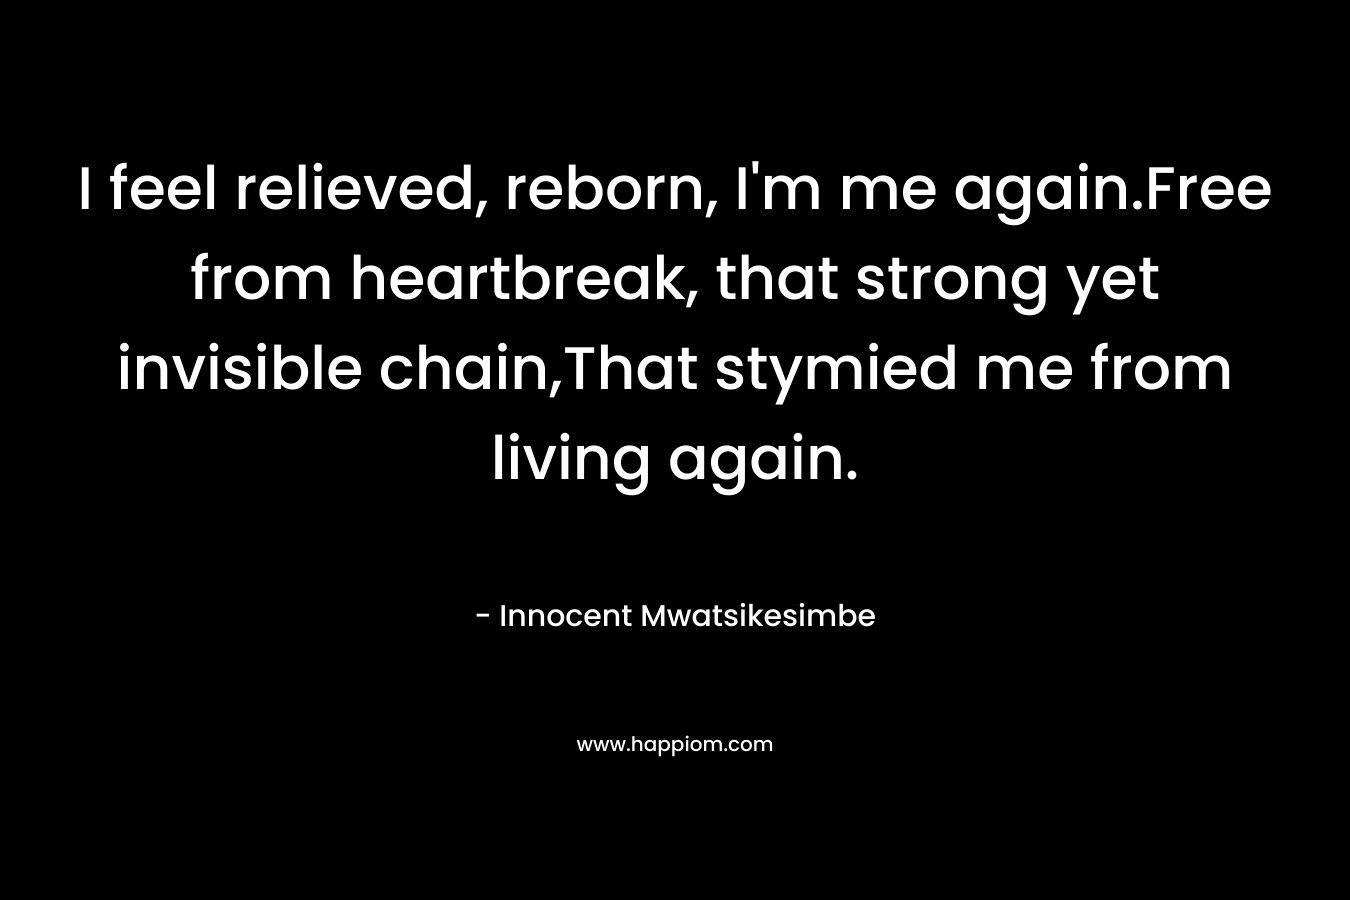 I feel relieved, reborn, I’m me again.Free from heartbreak, that strong yet invisible chain,That stymied me from living again. – Innocent Mwatsikesimbe